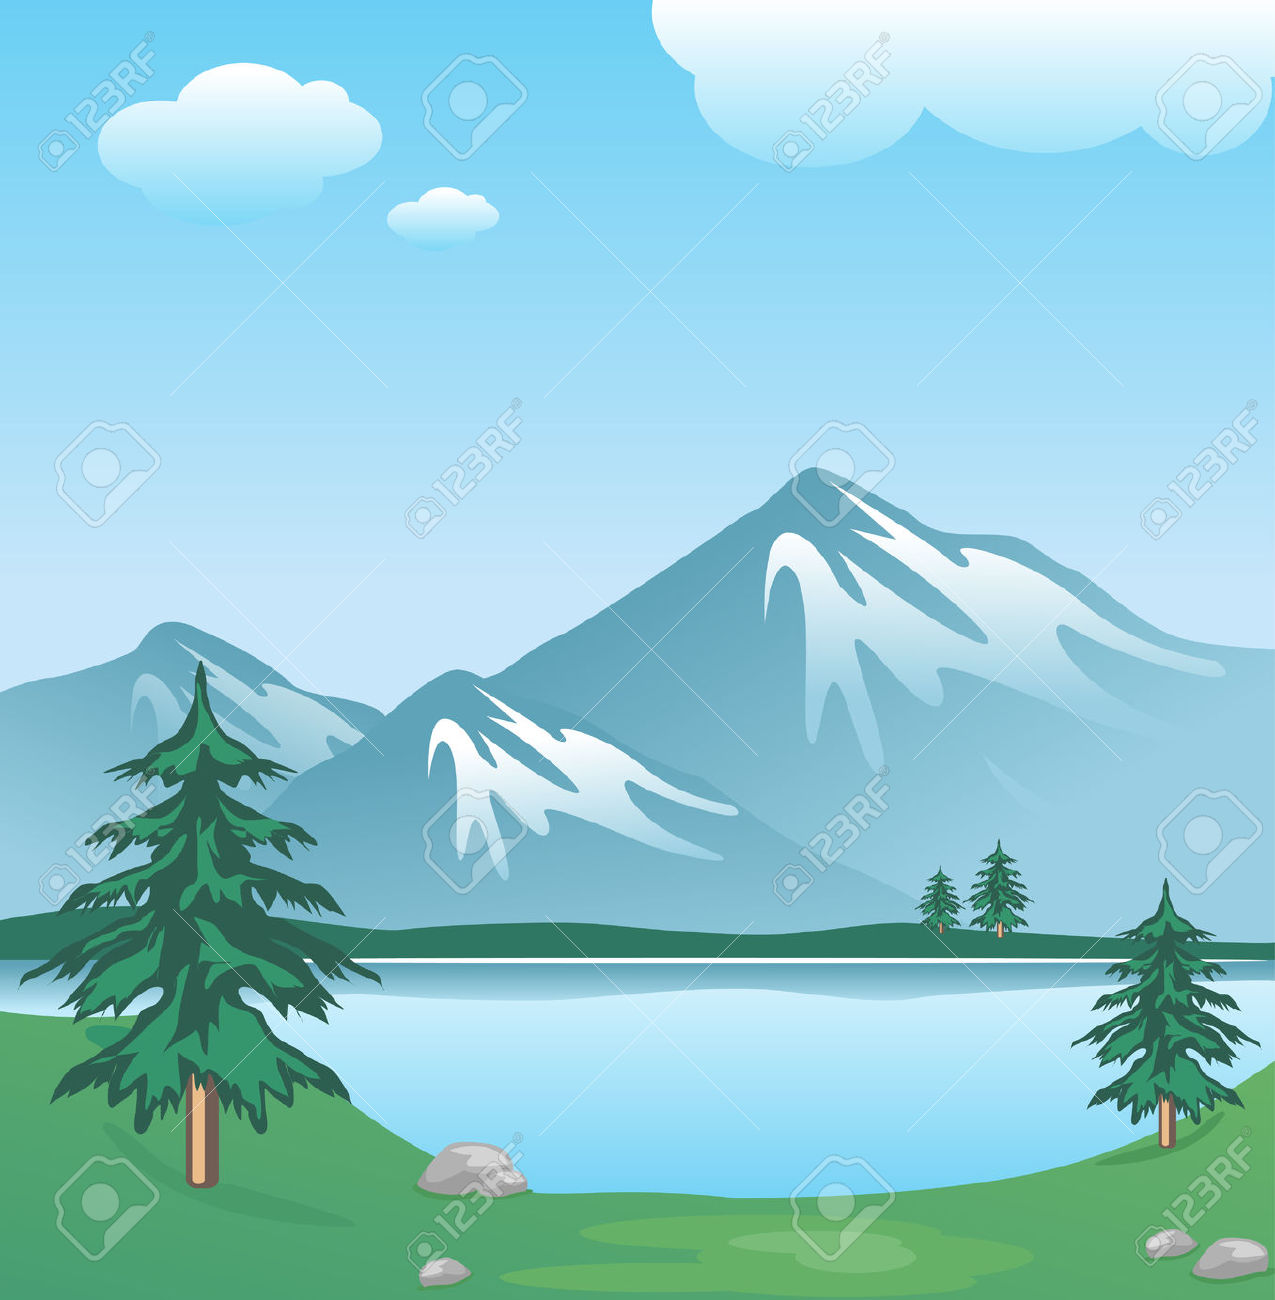 Lake clipart free vector for 